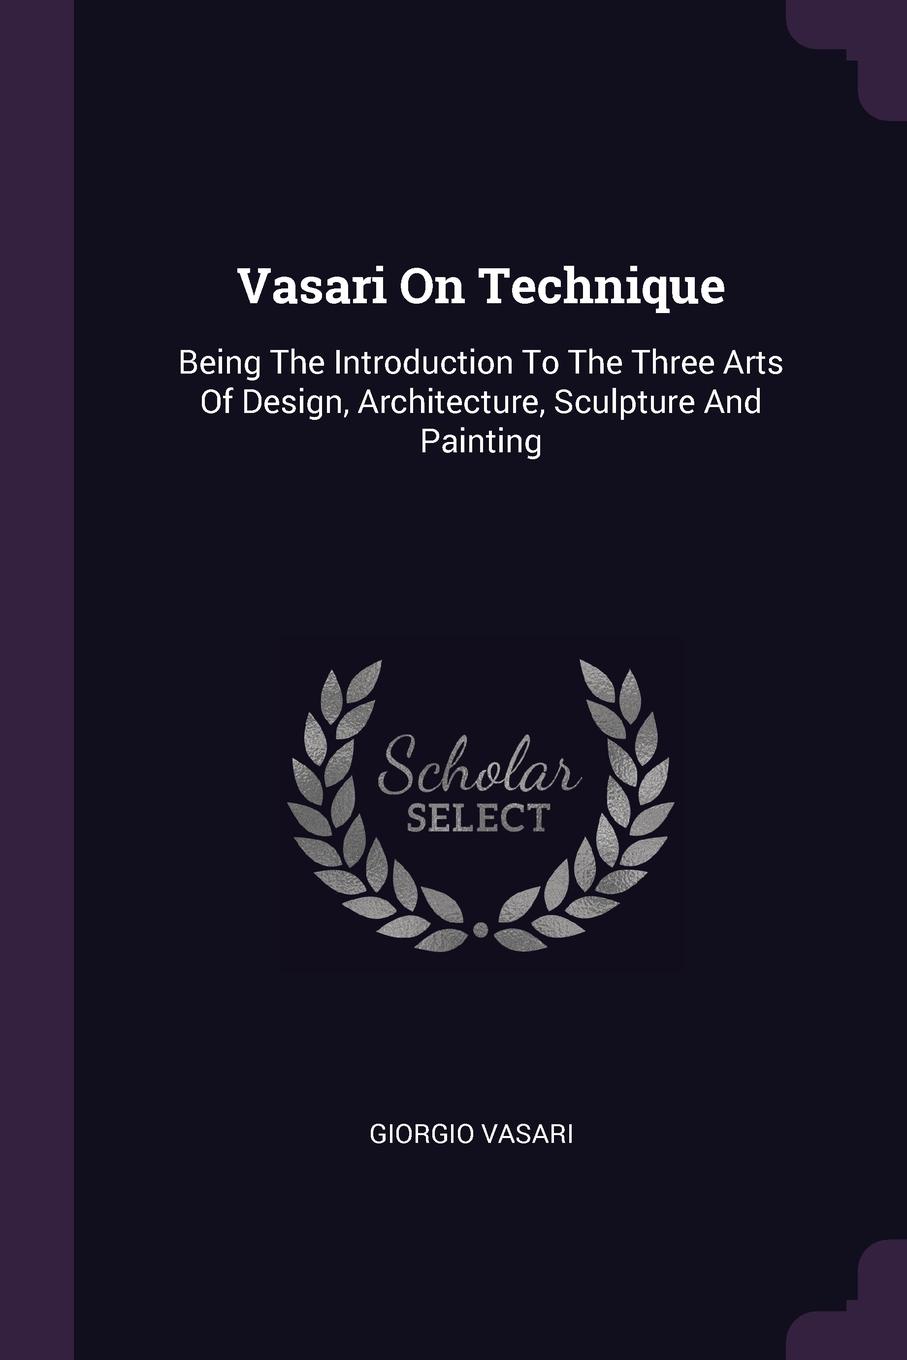 Vasari On Technique. Being The Introduction To The Three Arts Of Design, Architecture, Sculpture And Painting